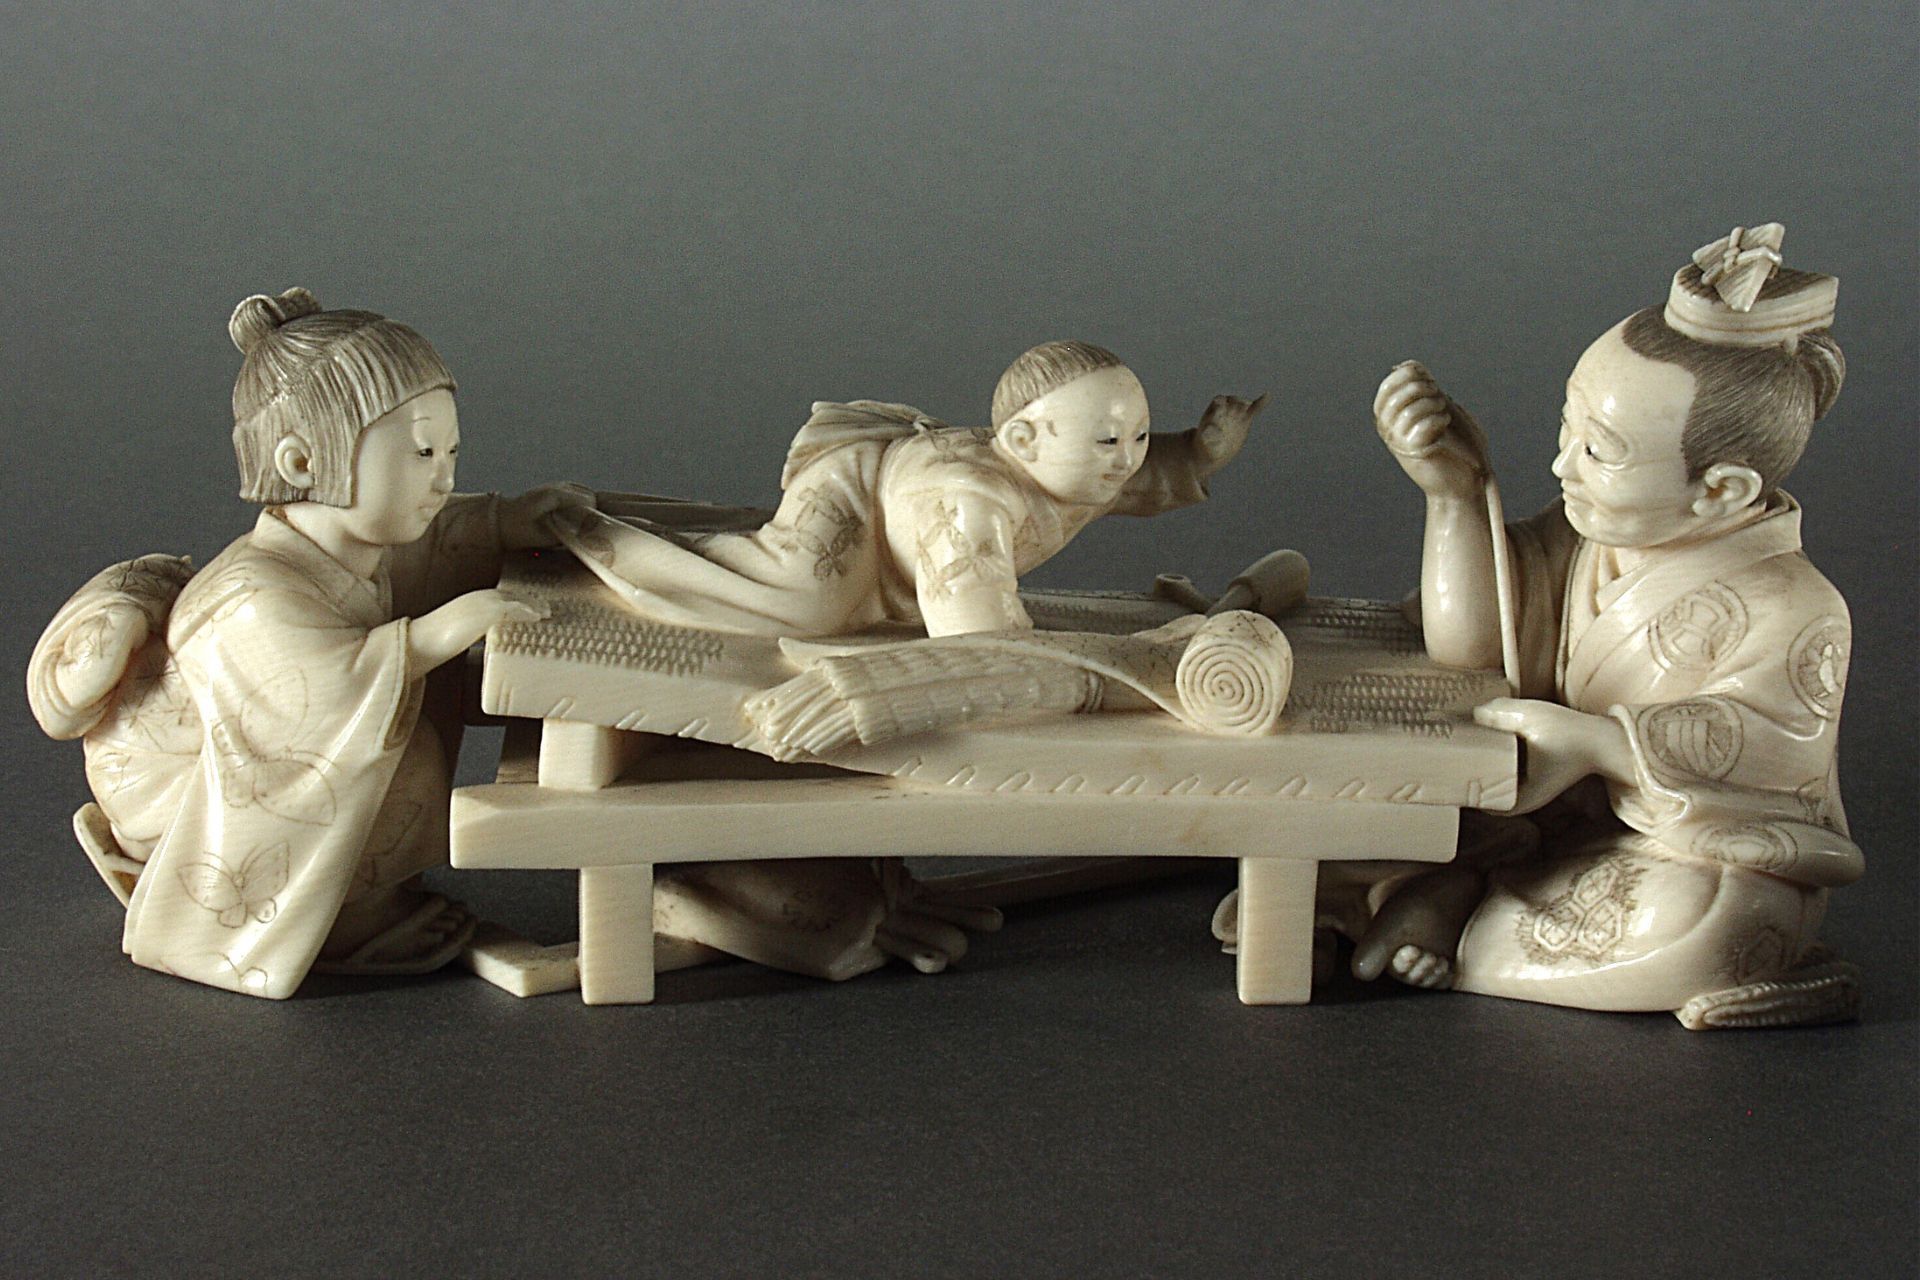 Ivory carving of a weaver and his family, dated to around 1913